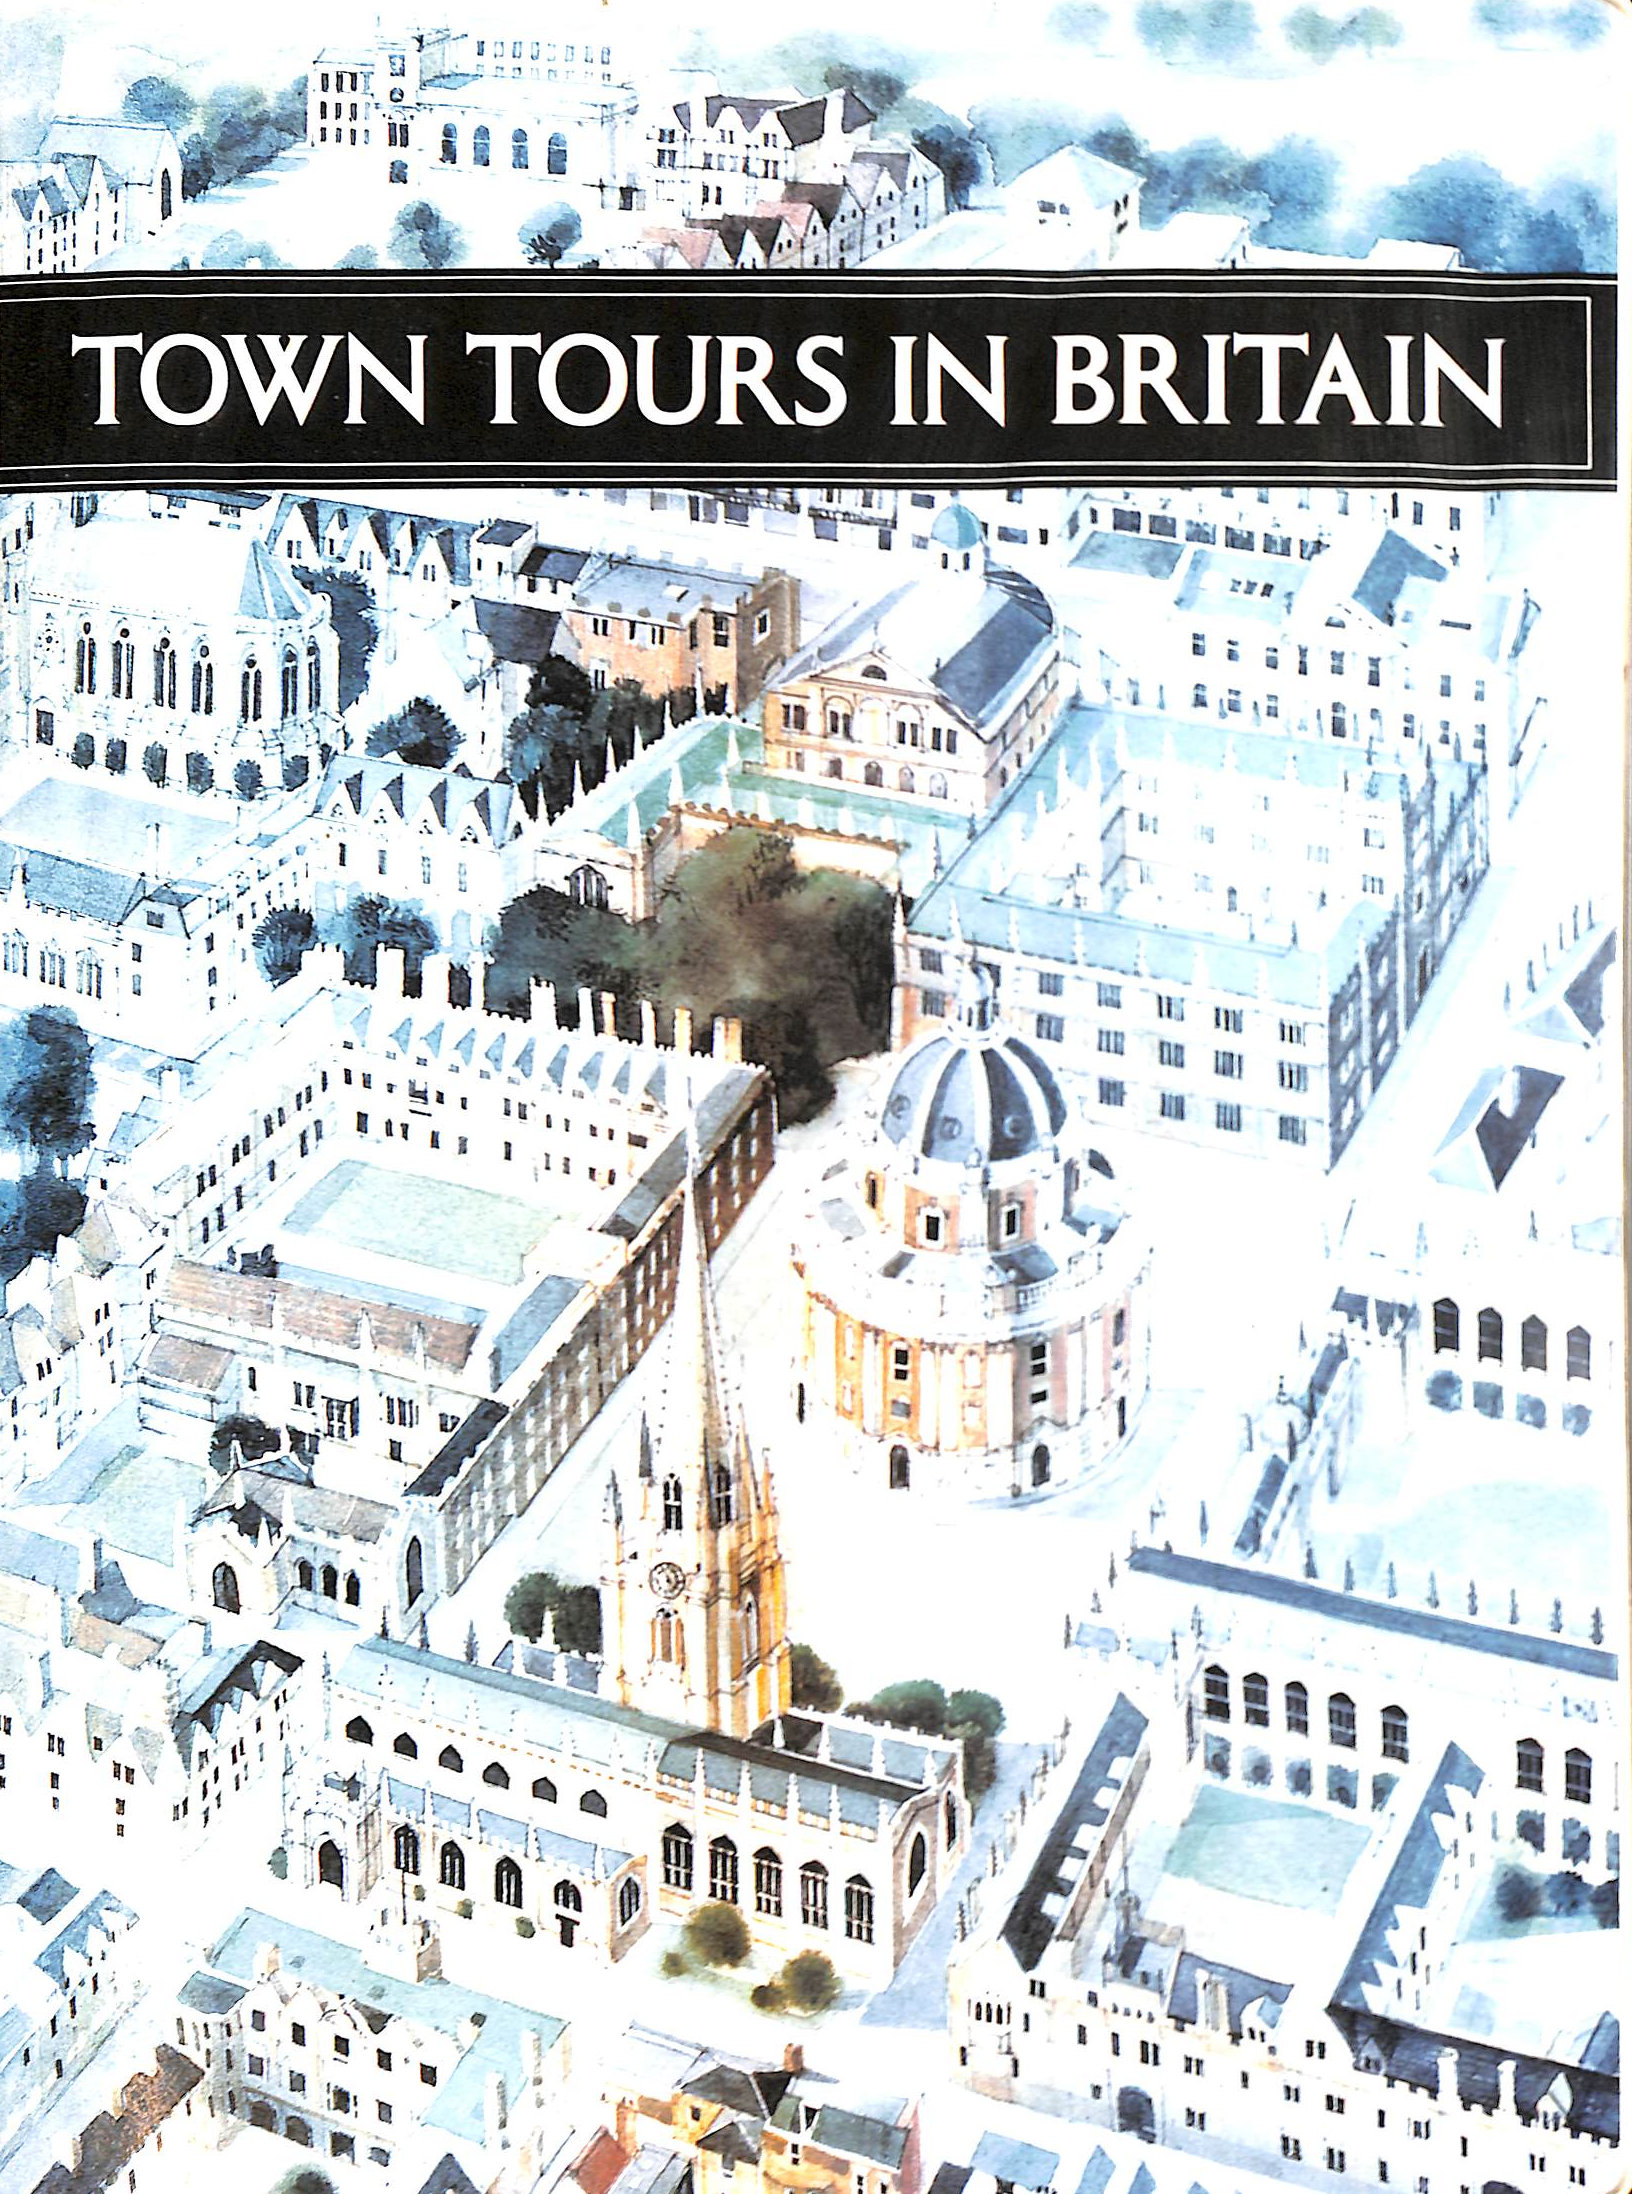 READERS DIGEST ASSOCIATION [EDITOR] - Town Tours in Britain